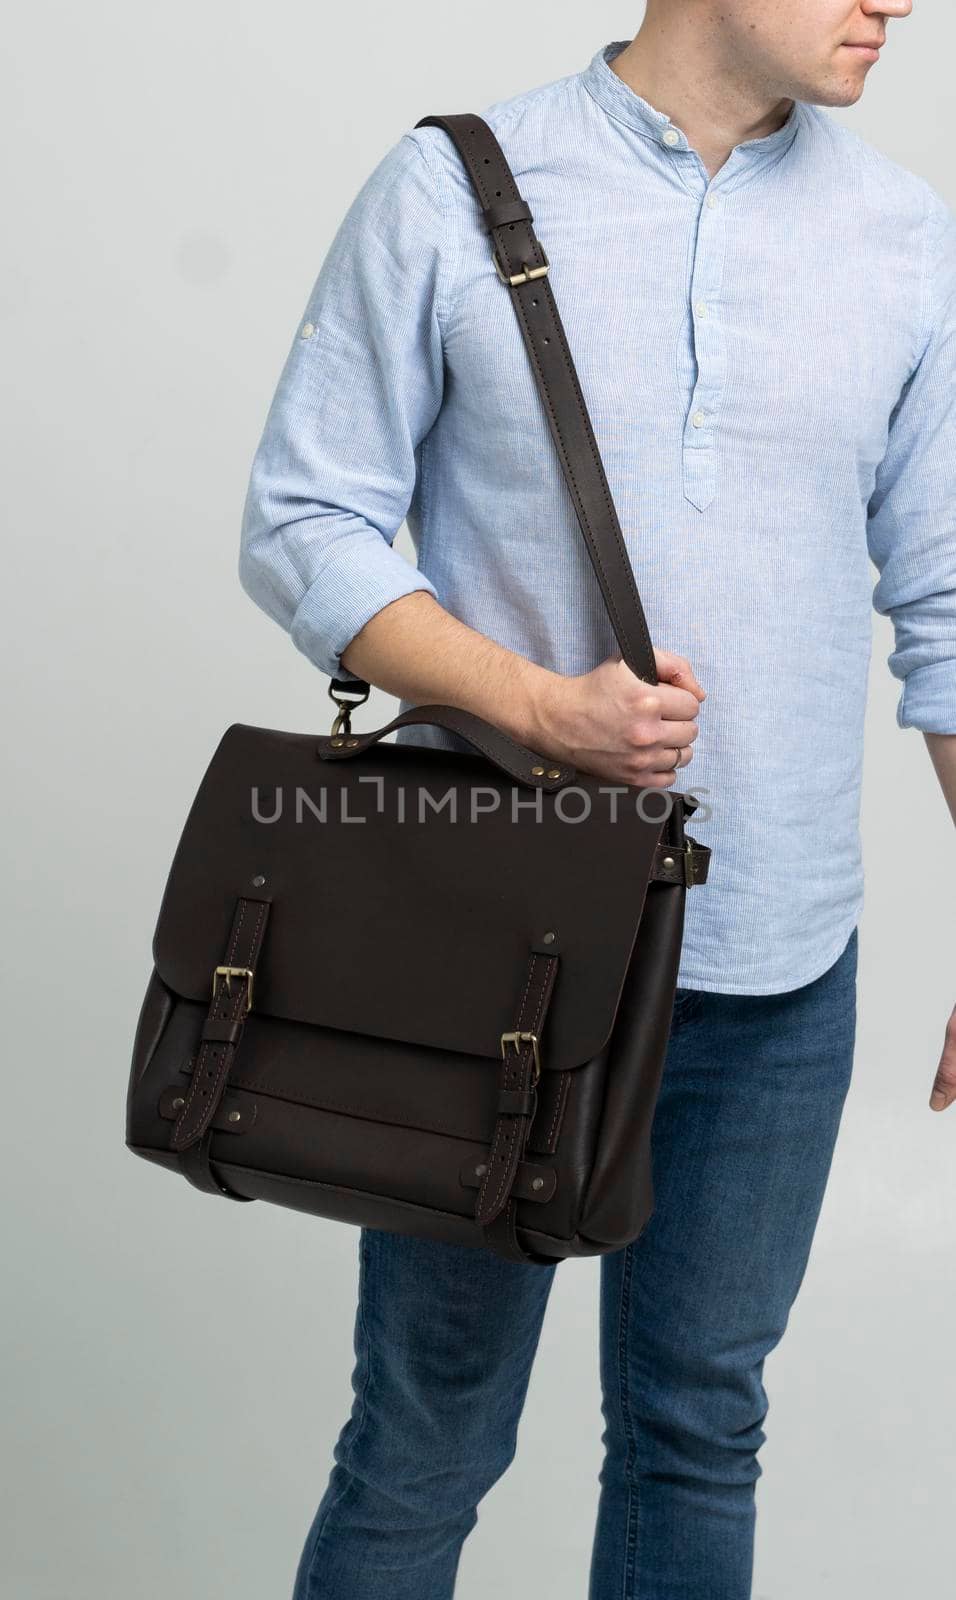 Brown men's shoulder leather bag for a documents and laptop on the shoulders of a man in a blue shirt and jeans with a white background. Satchel, mens leather handmade briefcase